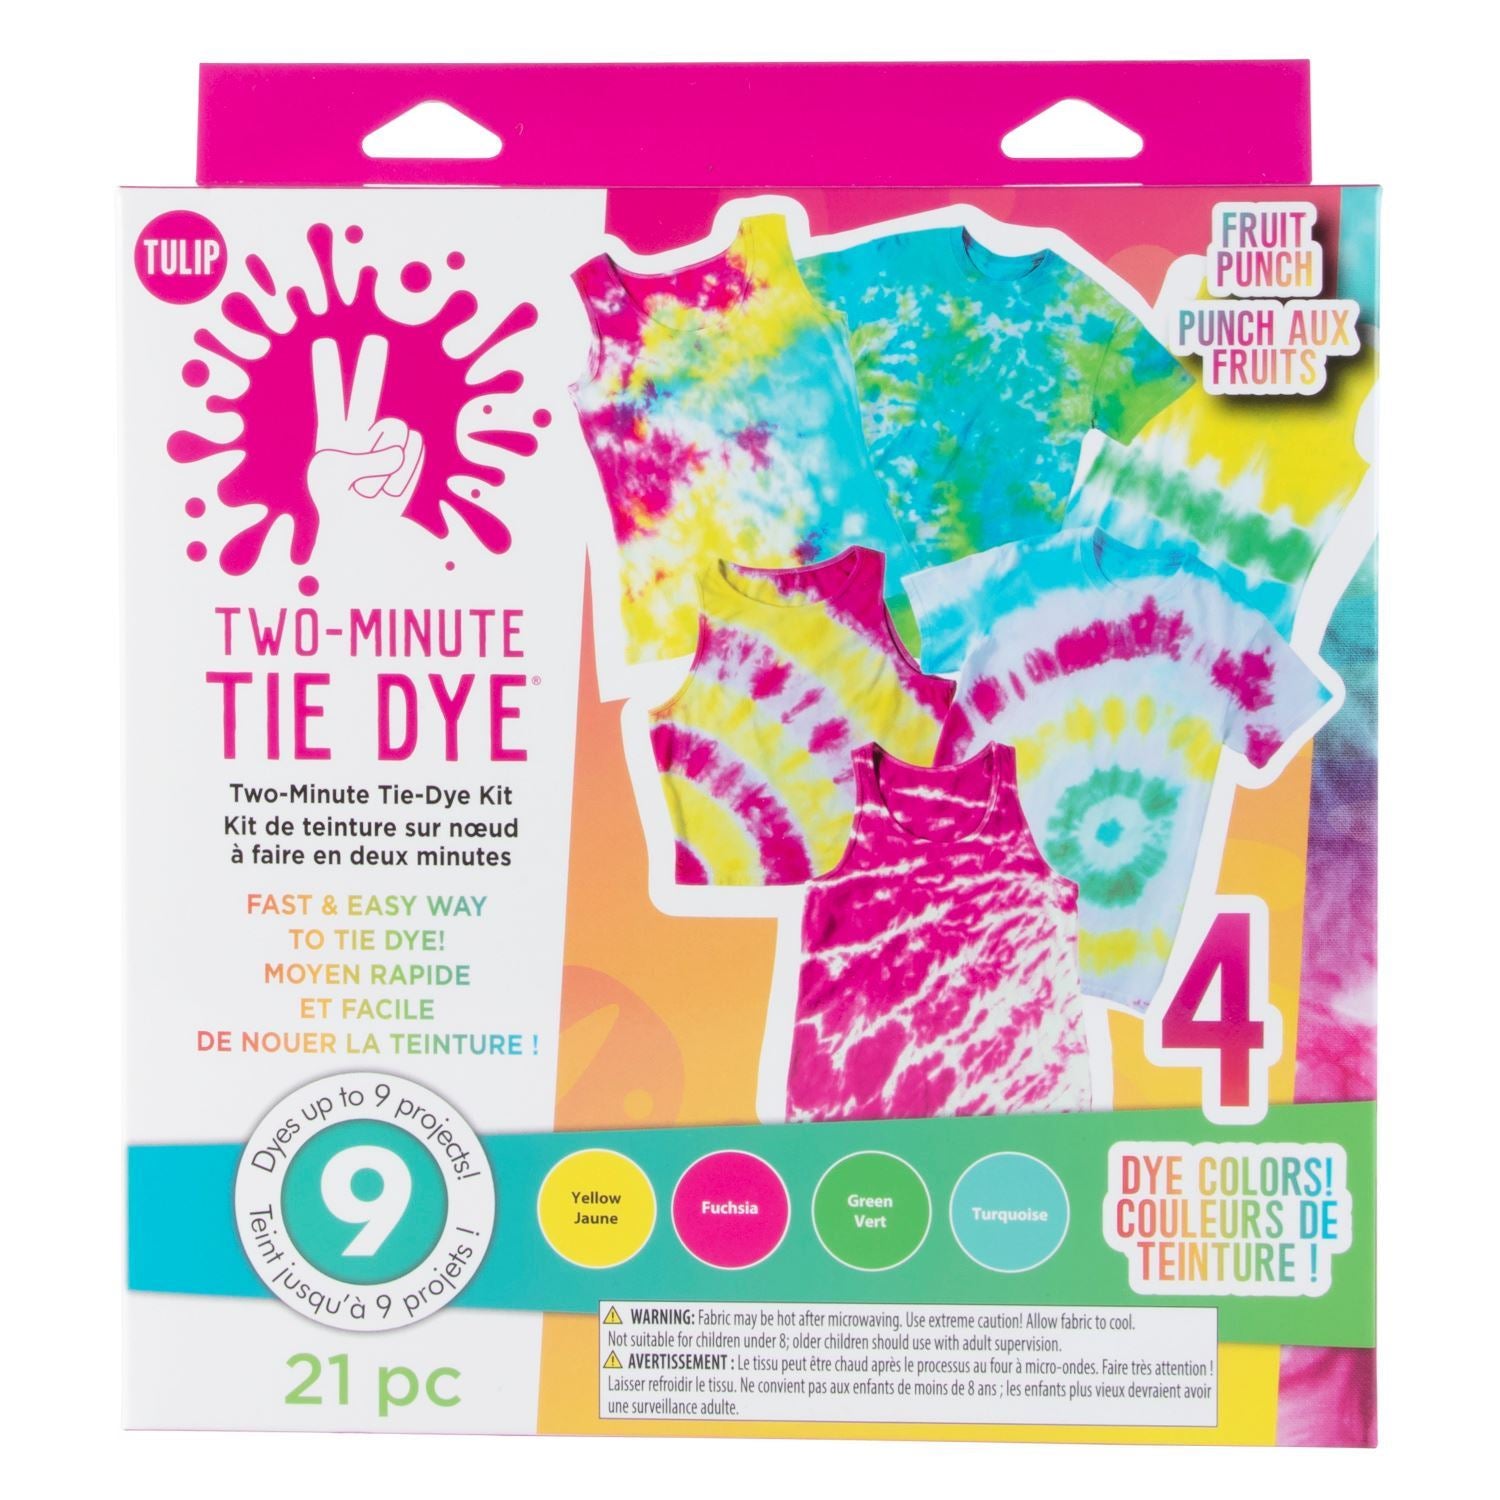  26-Color Tie Dye Kit for Adults, Kids - Fabric Dyes for Clothing  with Instructions, Table Cover, Rubber Bands, Gloves, and Aprons